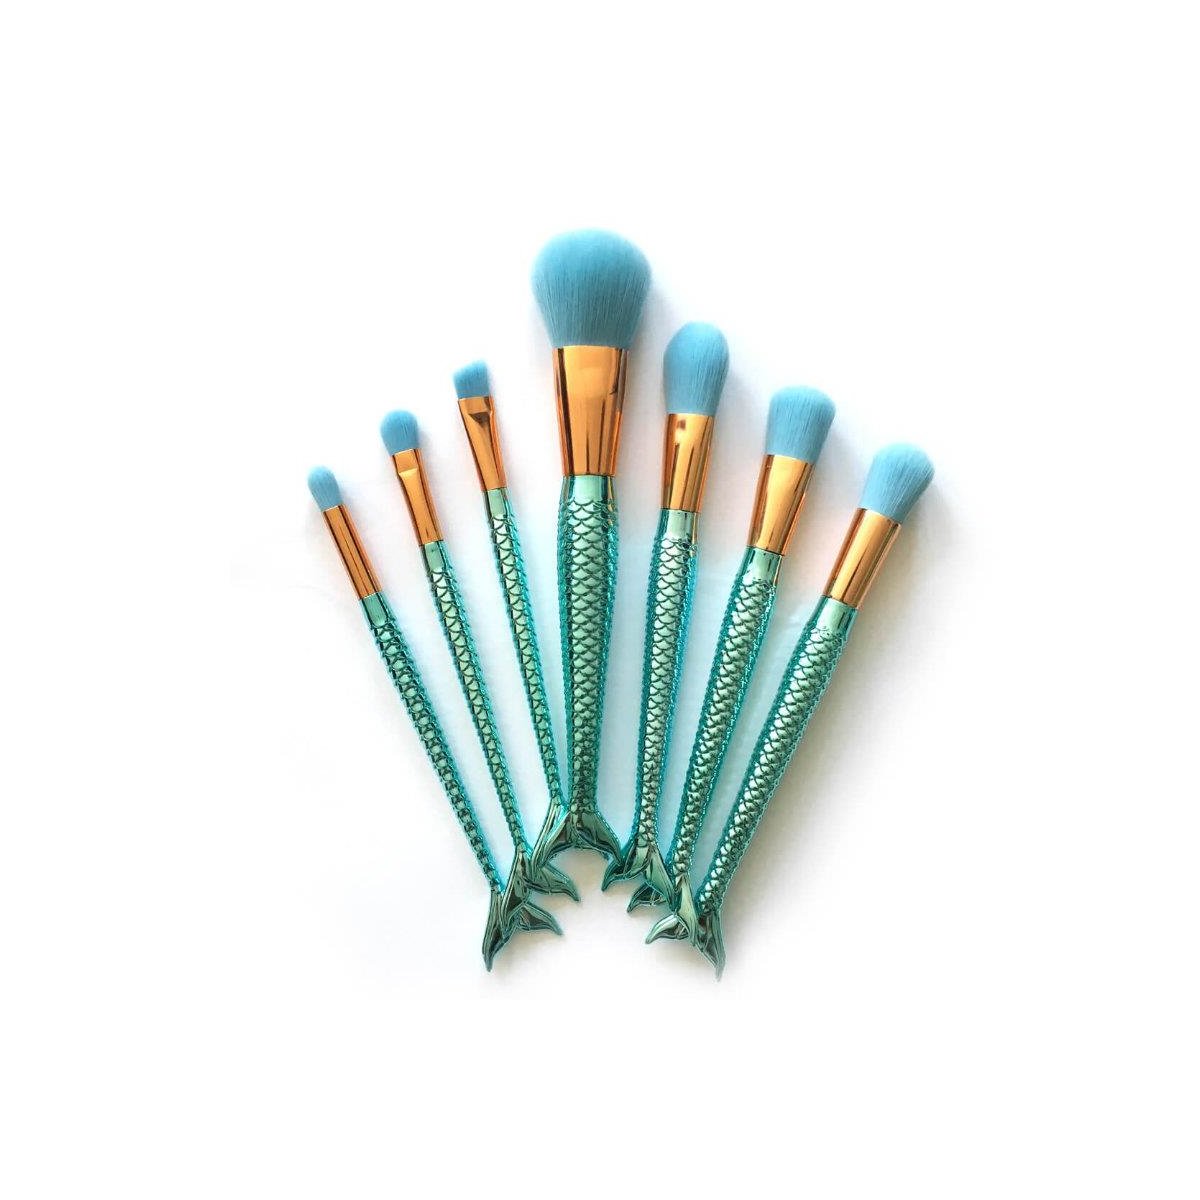 The most beautiful mermaid make-up brushes - Beautiful mermaid make-up brushes